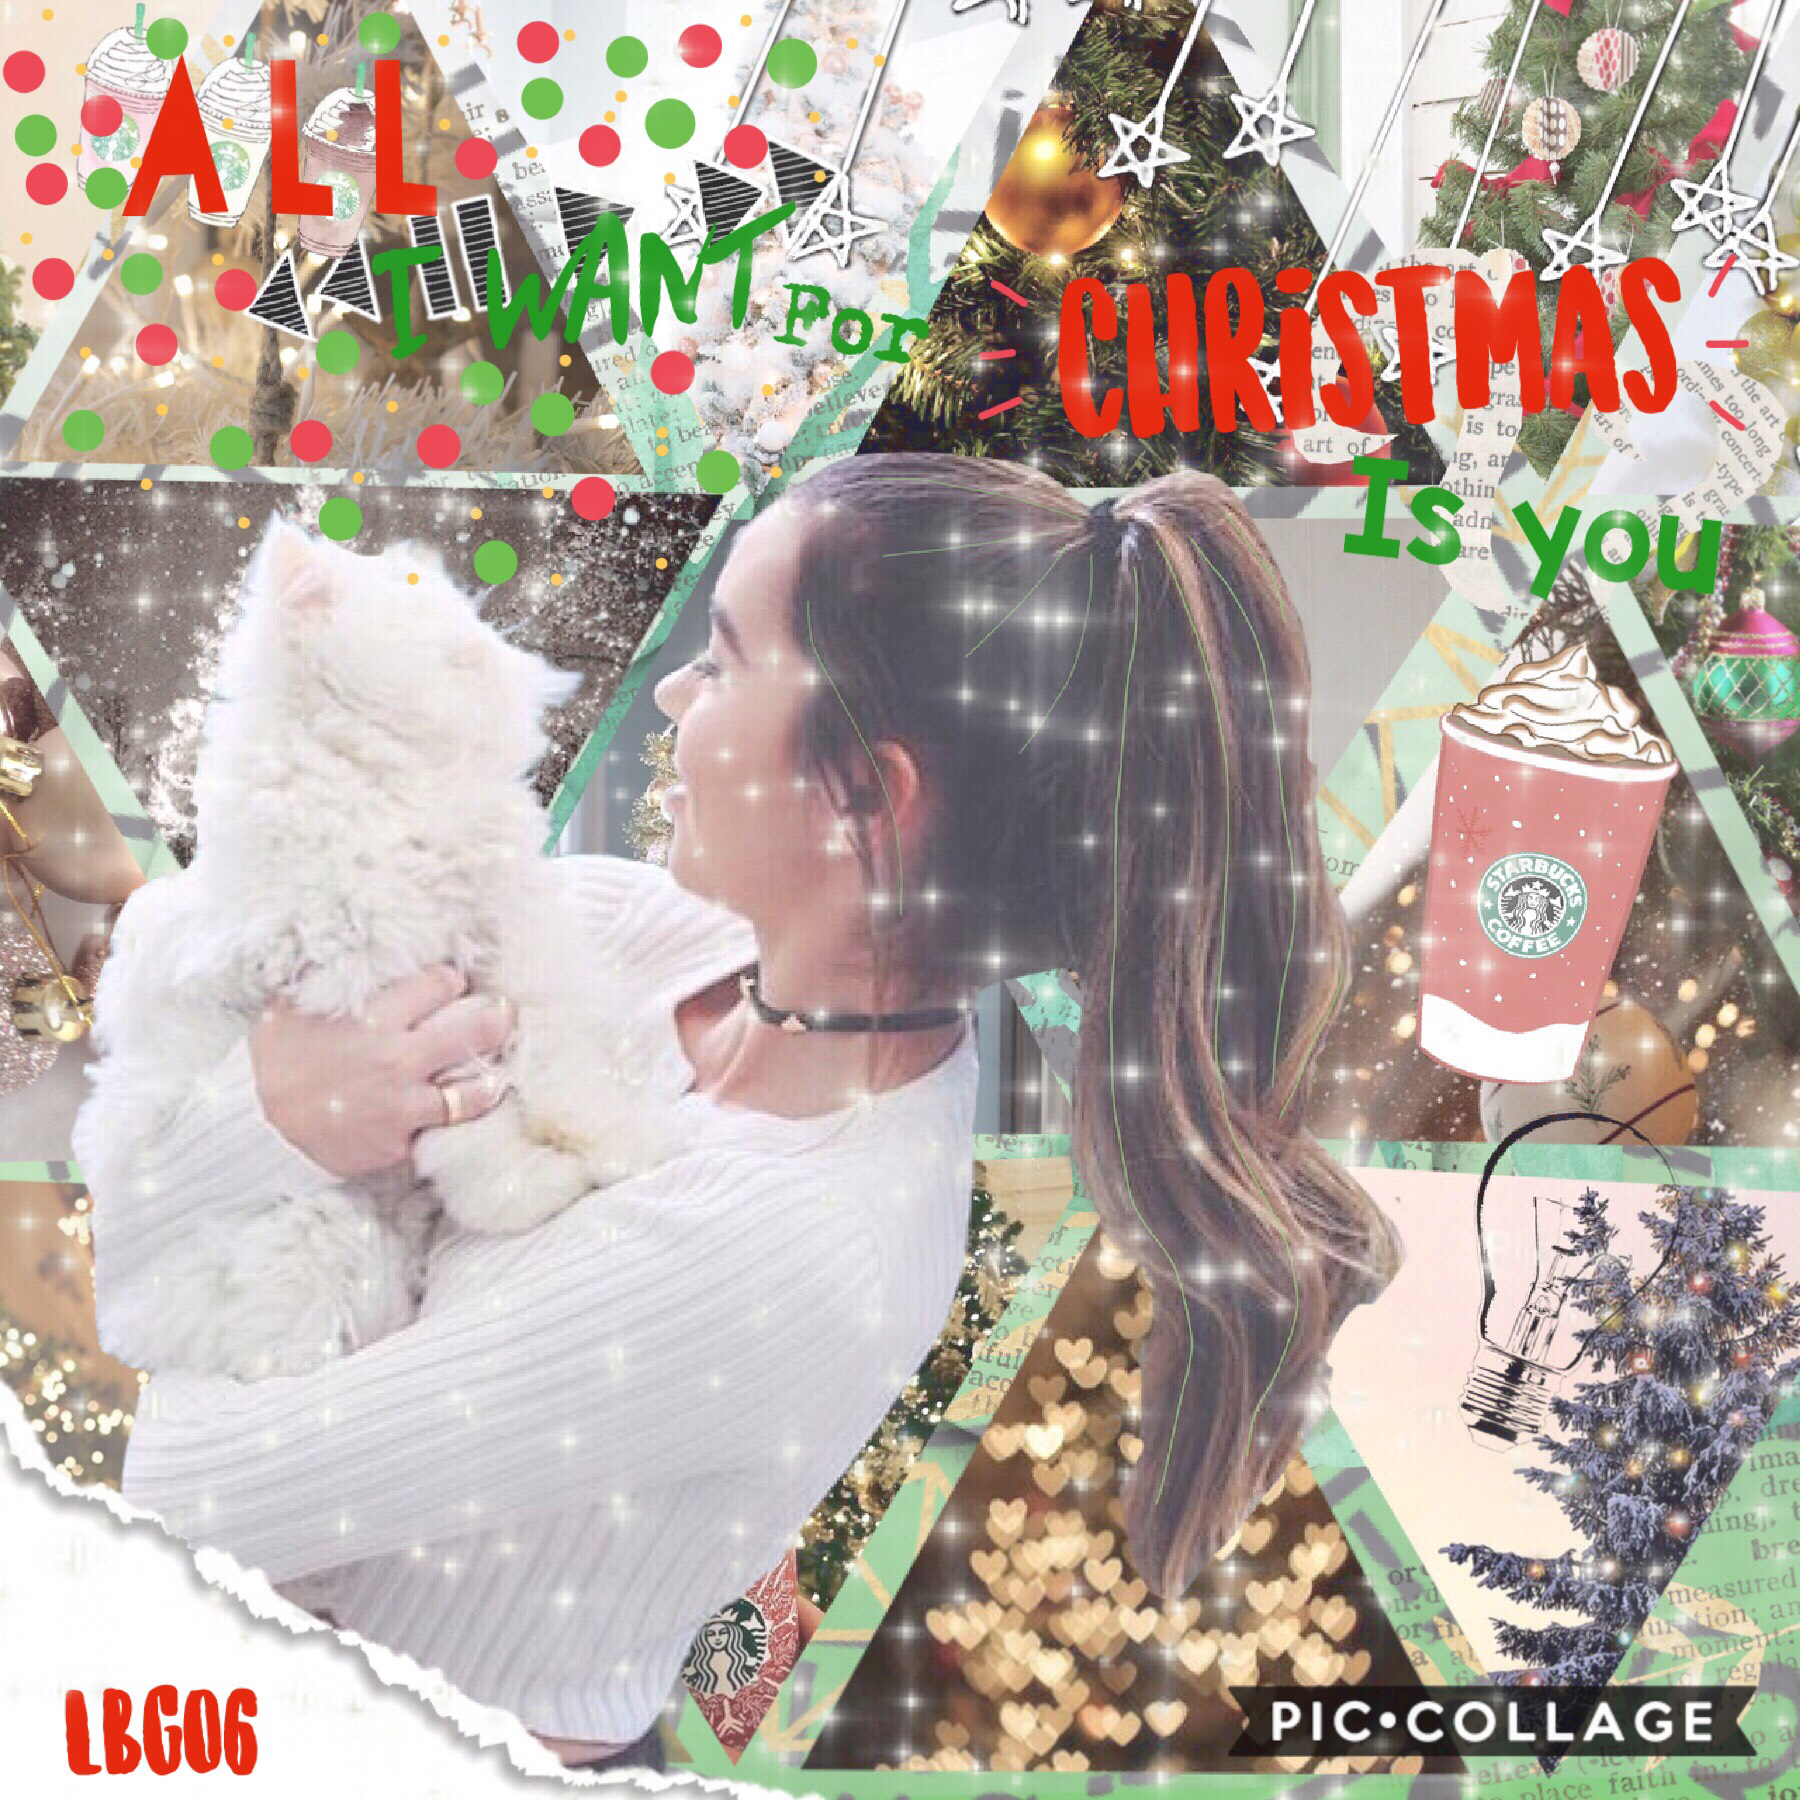 ❤️tap 💚

Sry I haven’t been posting. Soooooo busy with school 🤦🏼‍♀️

QOTD: fav Christmas song?
AOTD!p: all I want for Christmas is you 😂

Omg I’m doing so many Christmas collages and it’s not even December! I’m gonna run out of ideas 😂😂

❤️💚XOXO❤️💚